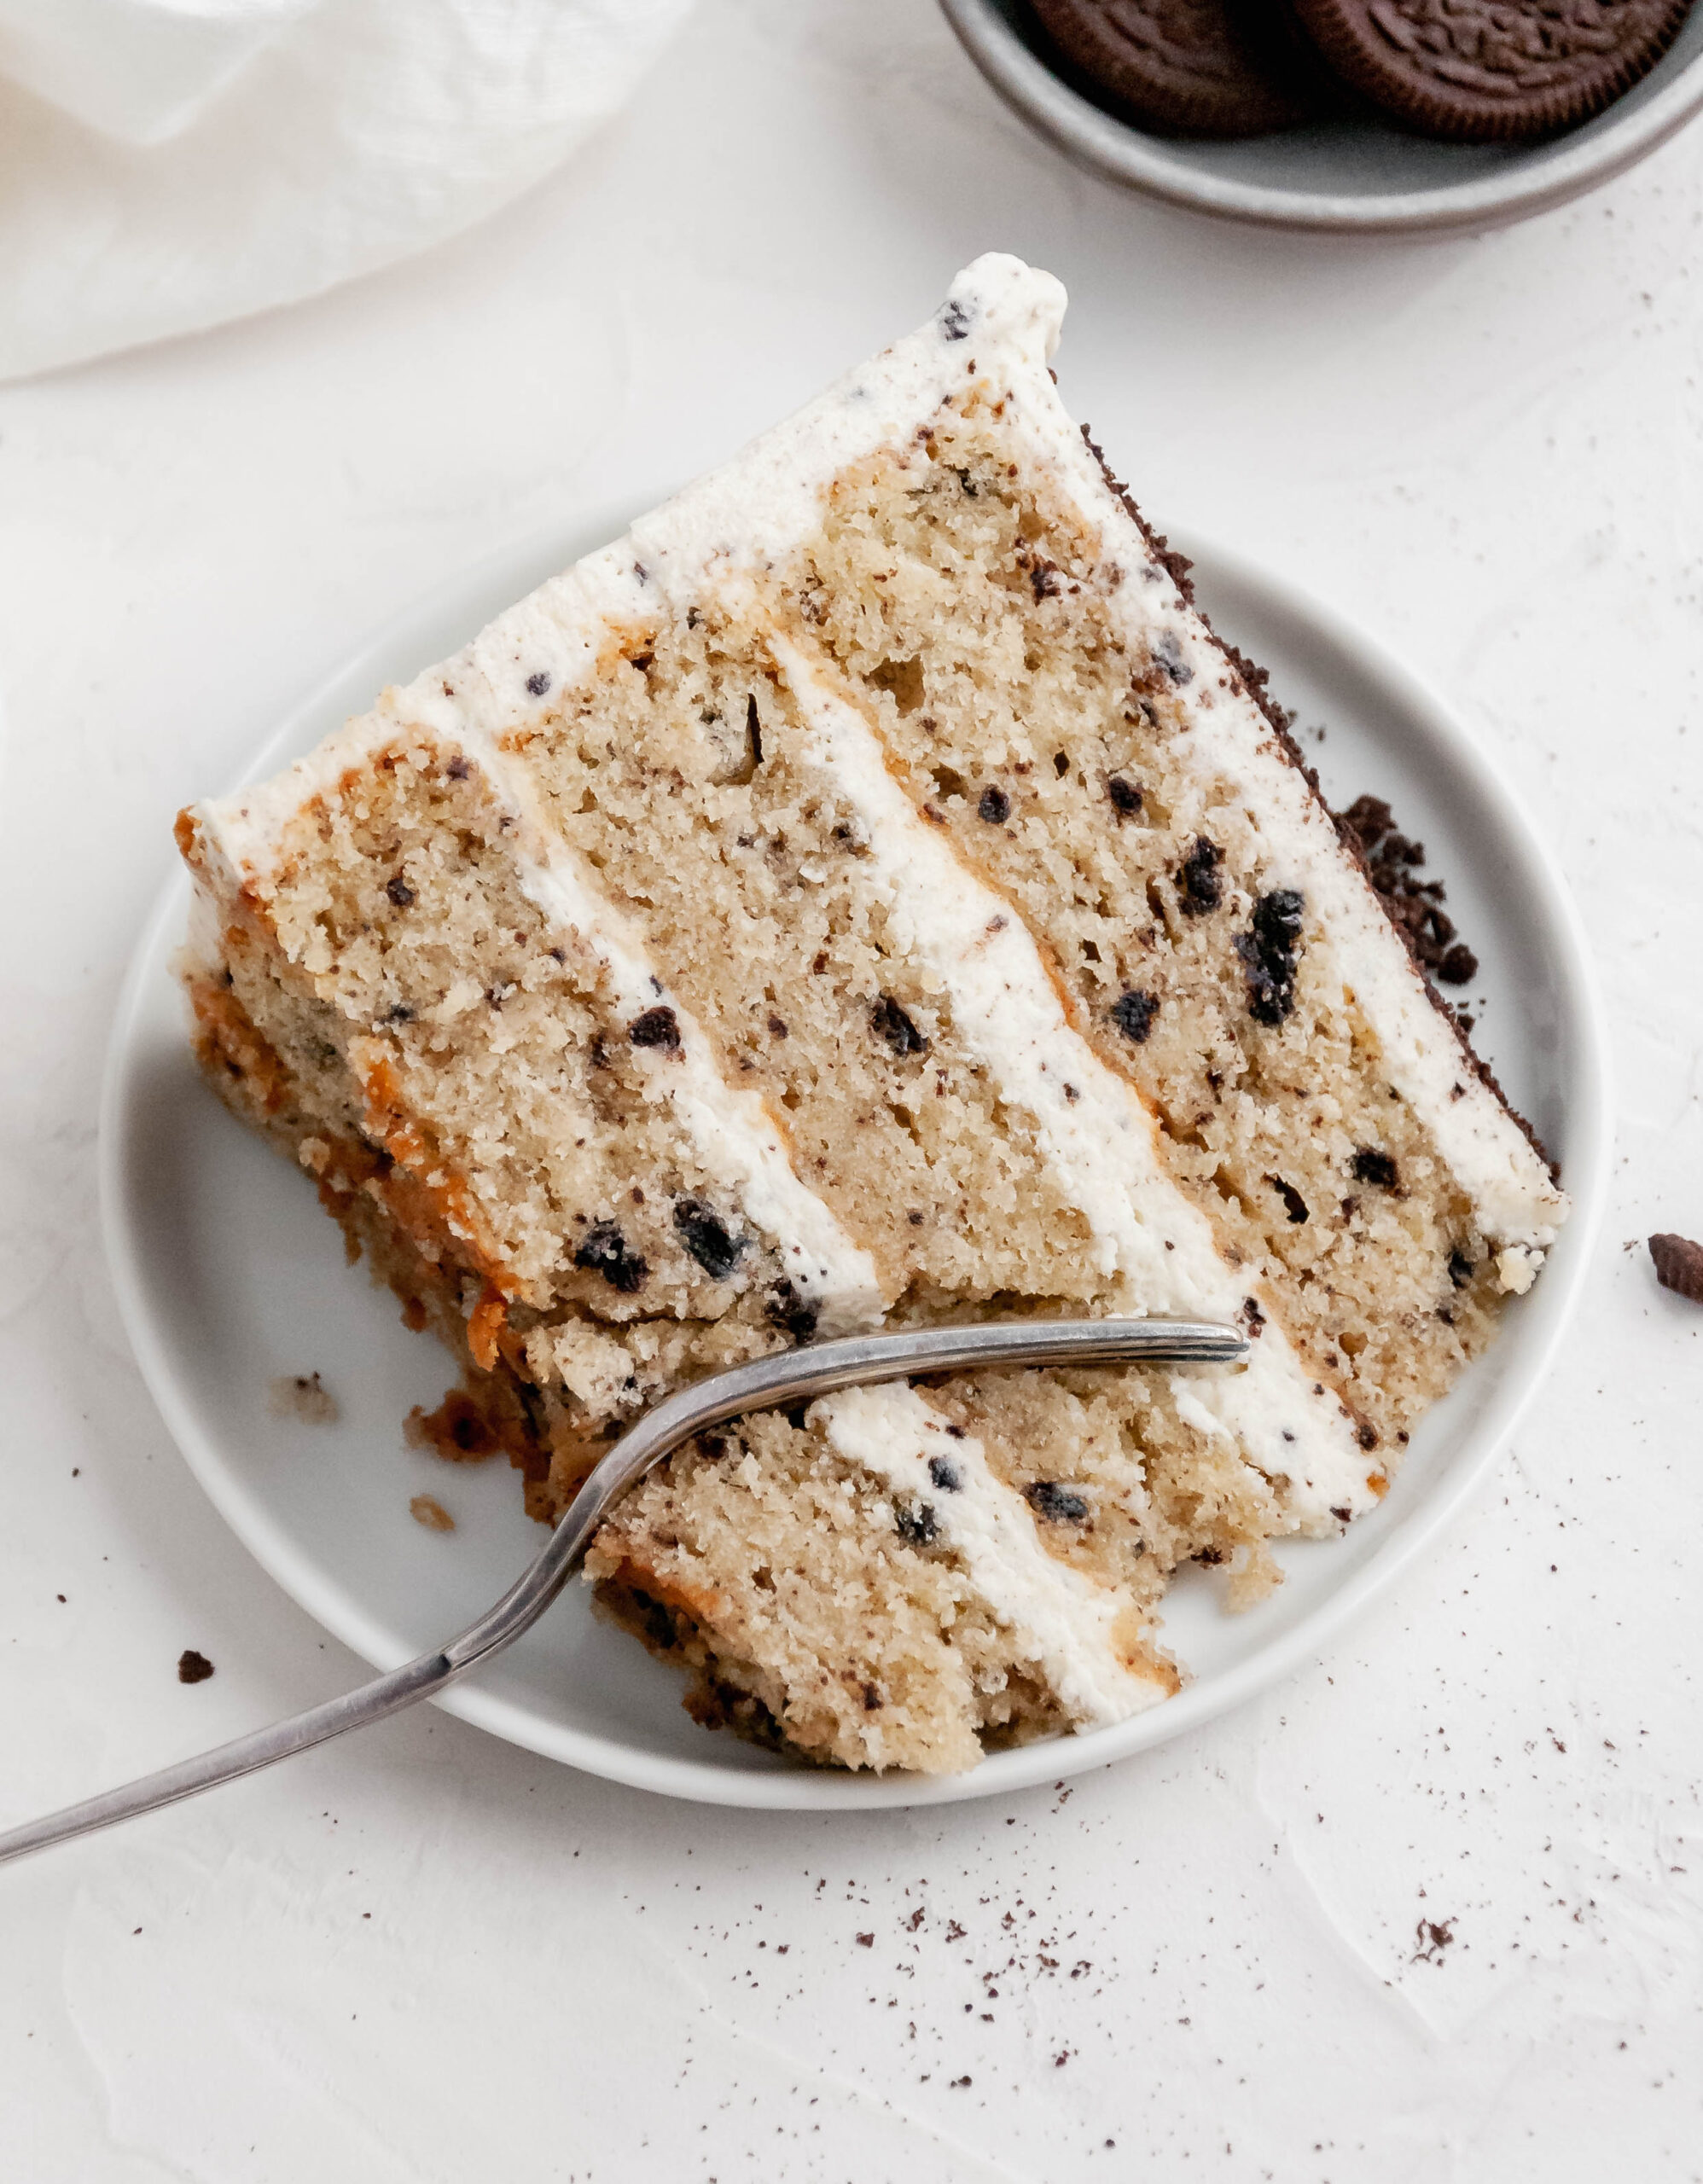 A slice of Oreo layer cake on a plate.